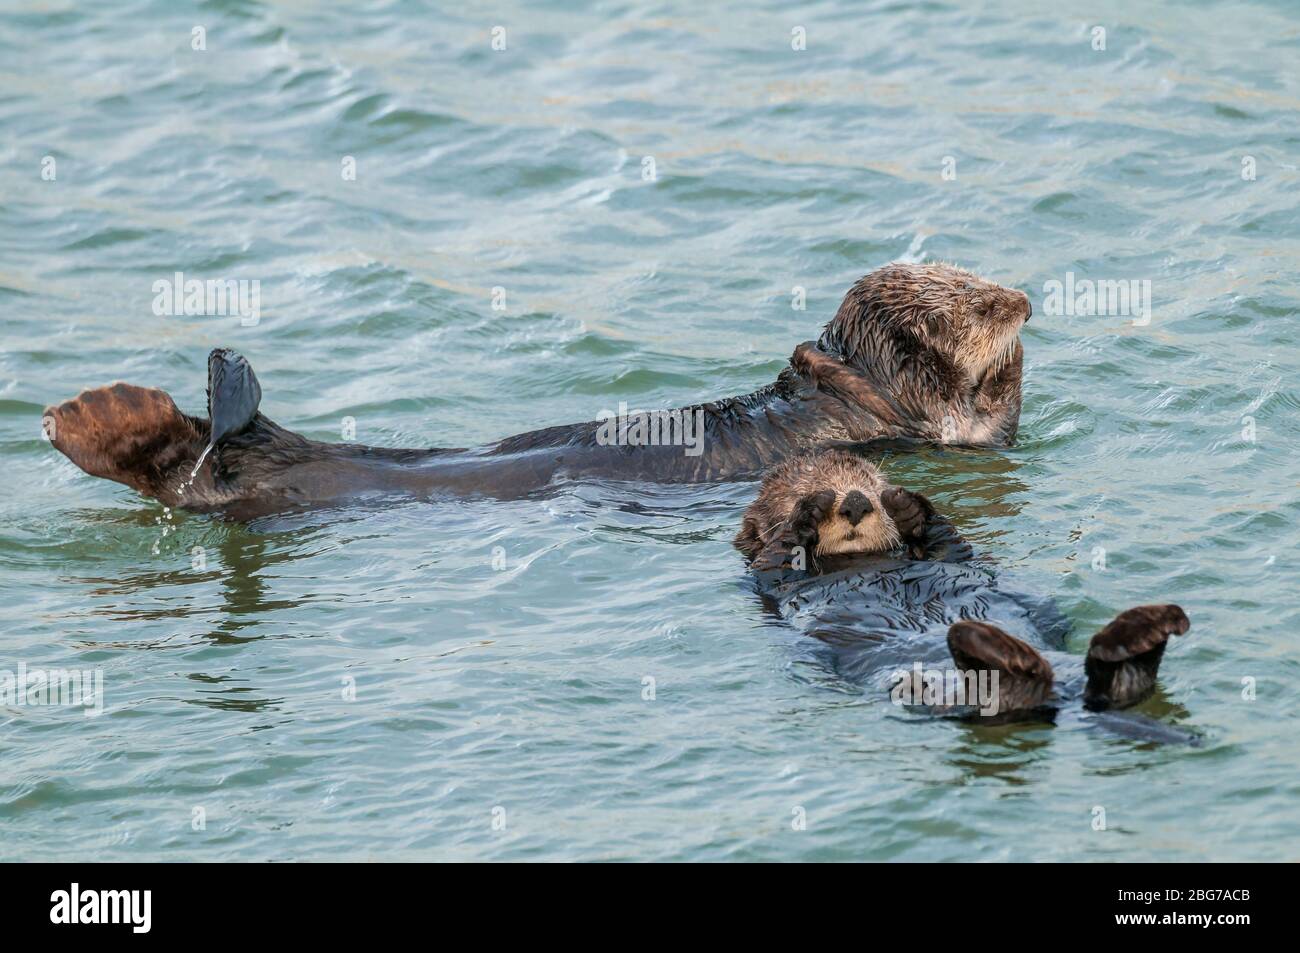 Sea Otter (Enhydra lutris) parent with pup, Moss Landing Bay, Monterey County, CA, USA, by Dominique Braud/Dembinsky Photo Assoc Stock Photo